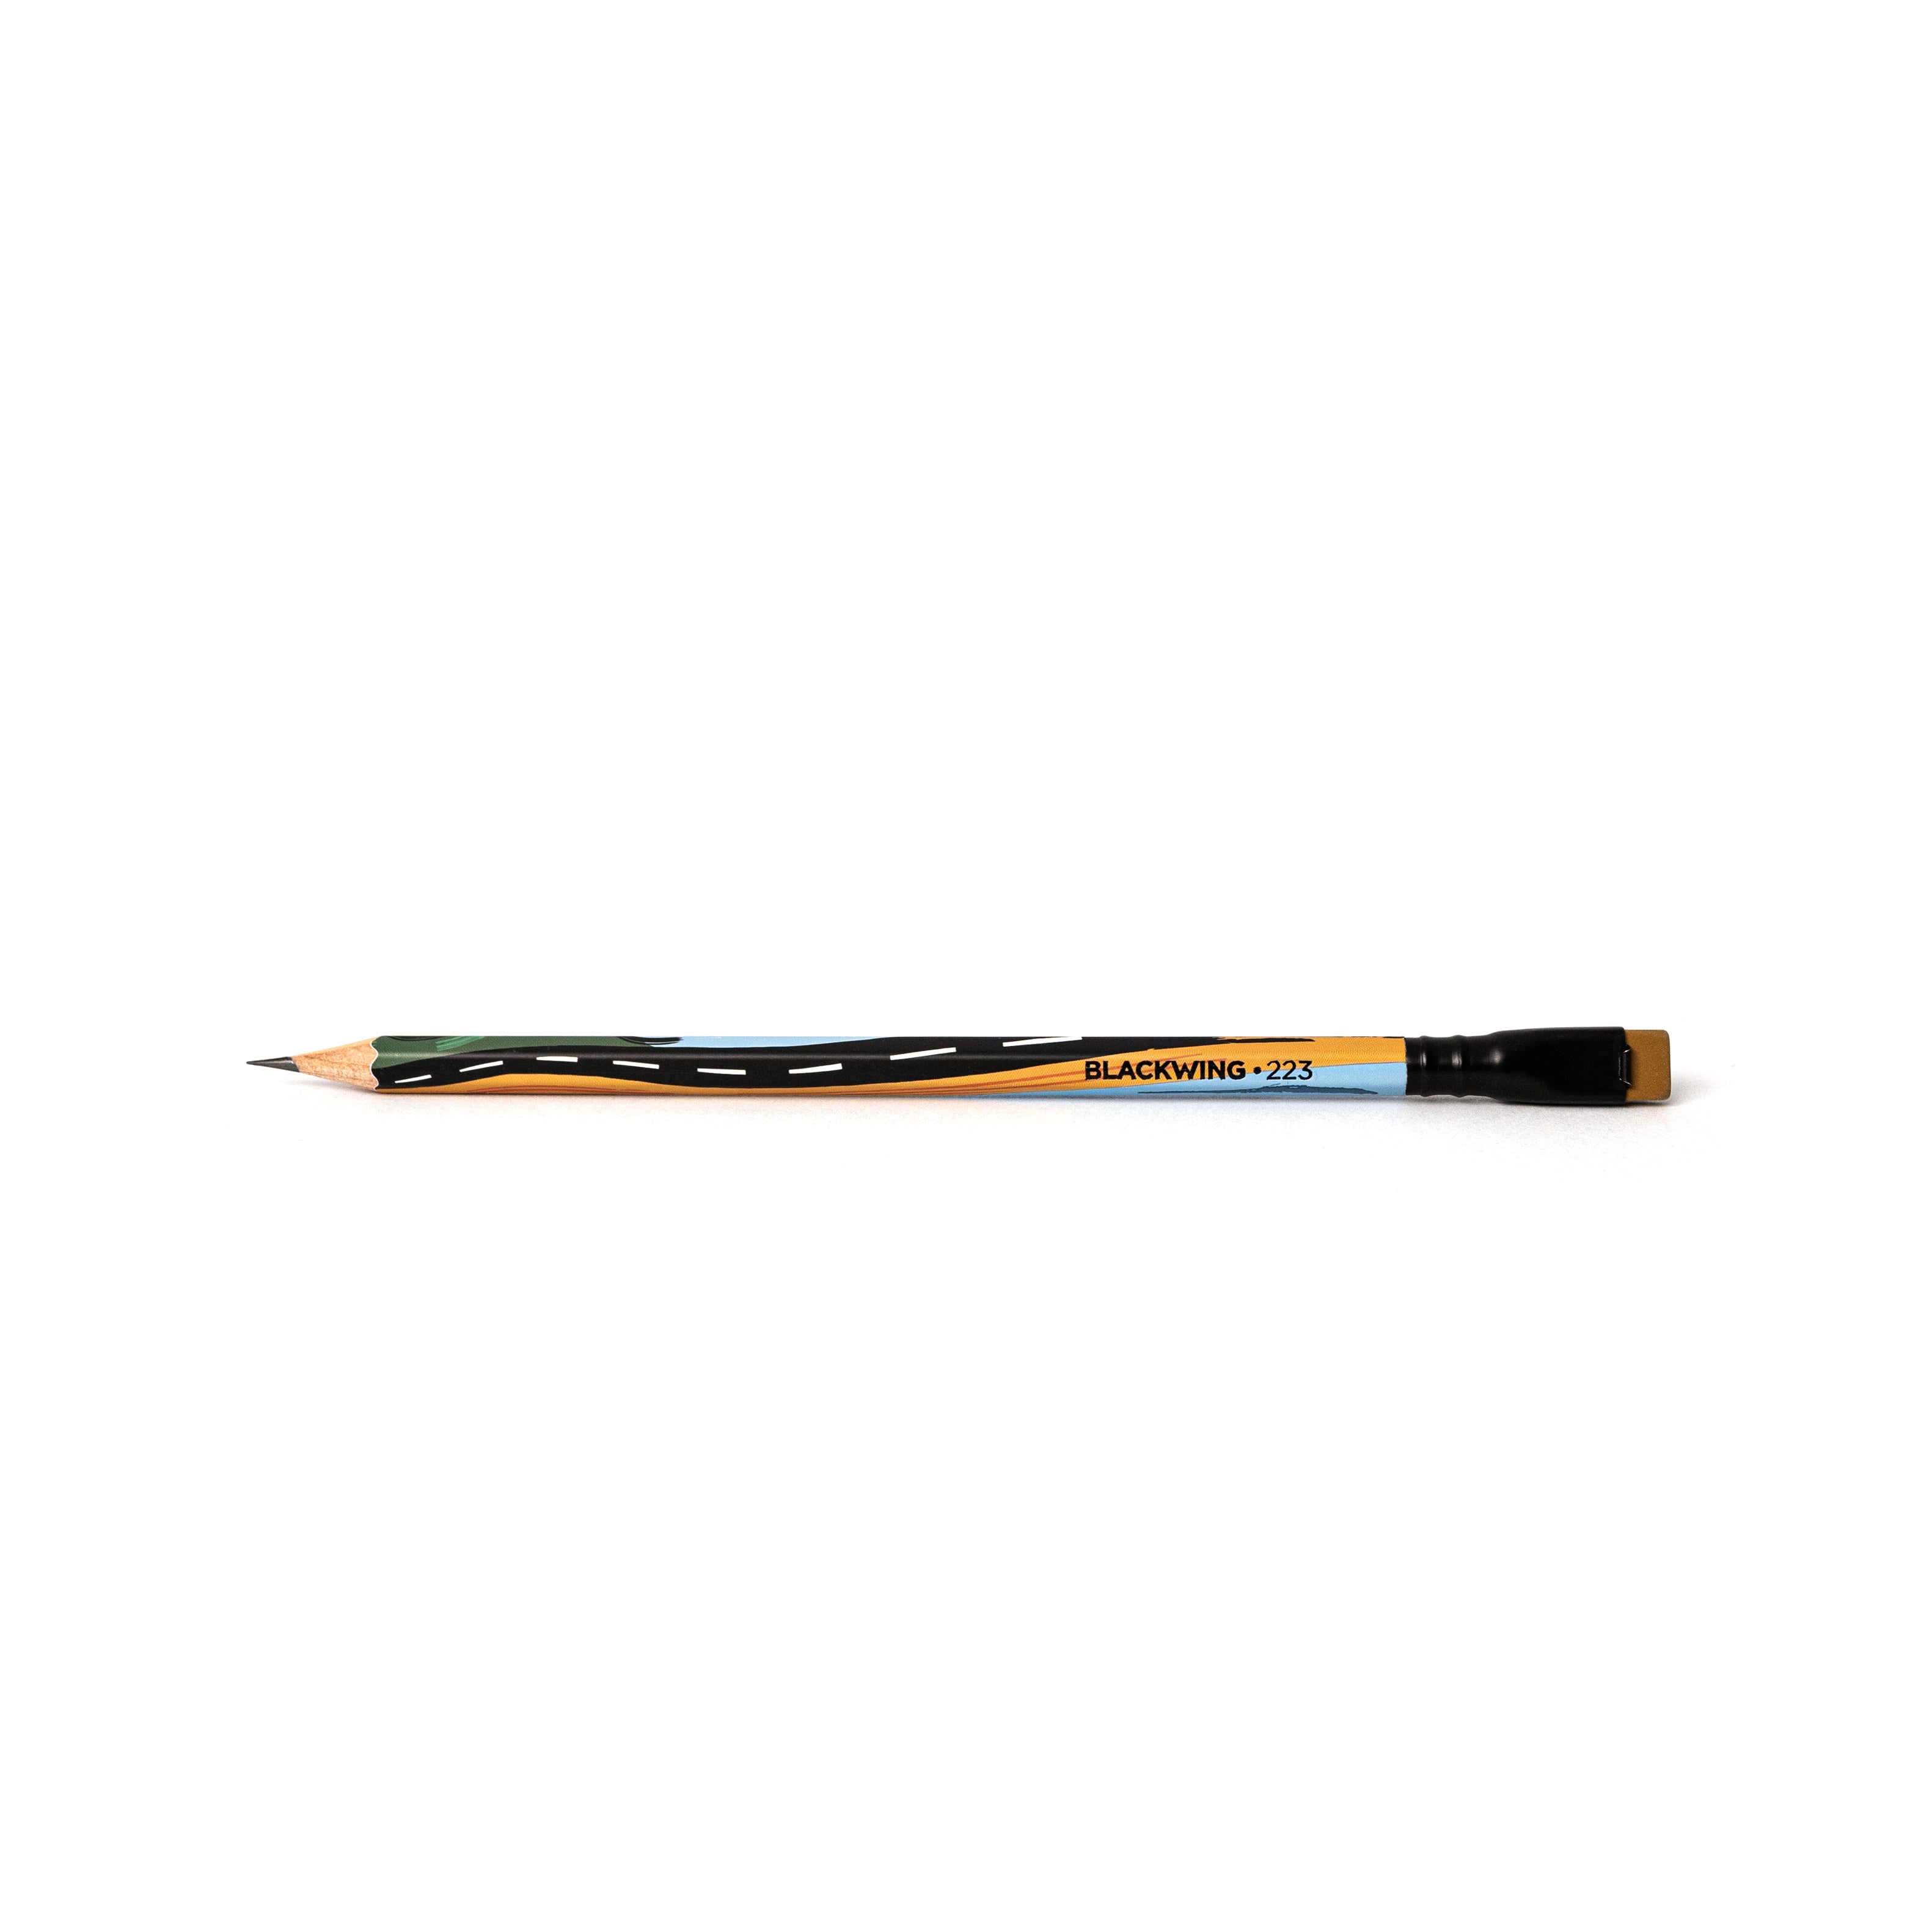 A pencil with a black design on it inspired by the Blackwing Volume 223 (Set of 12).